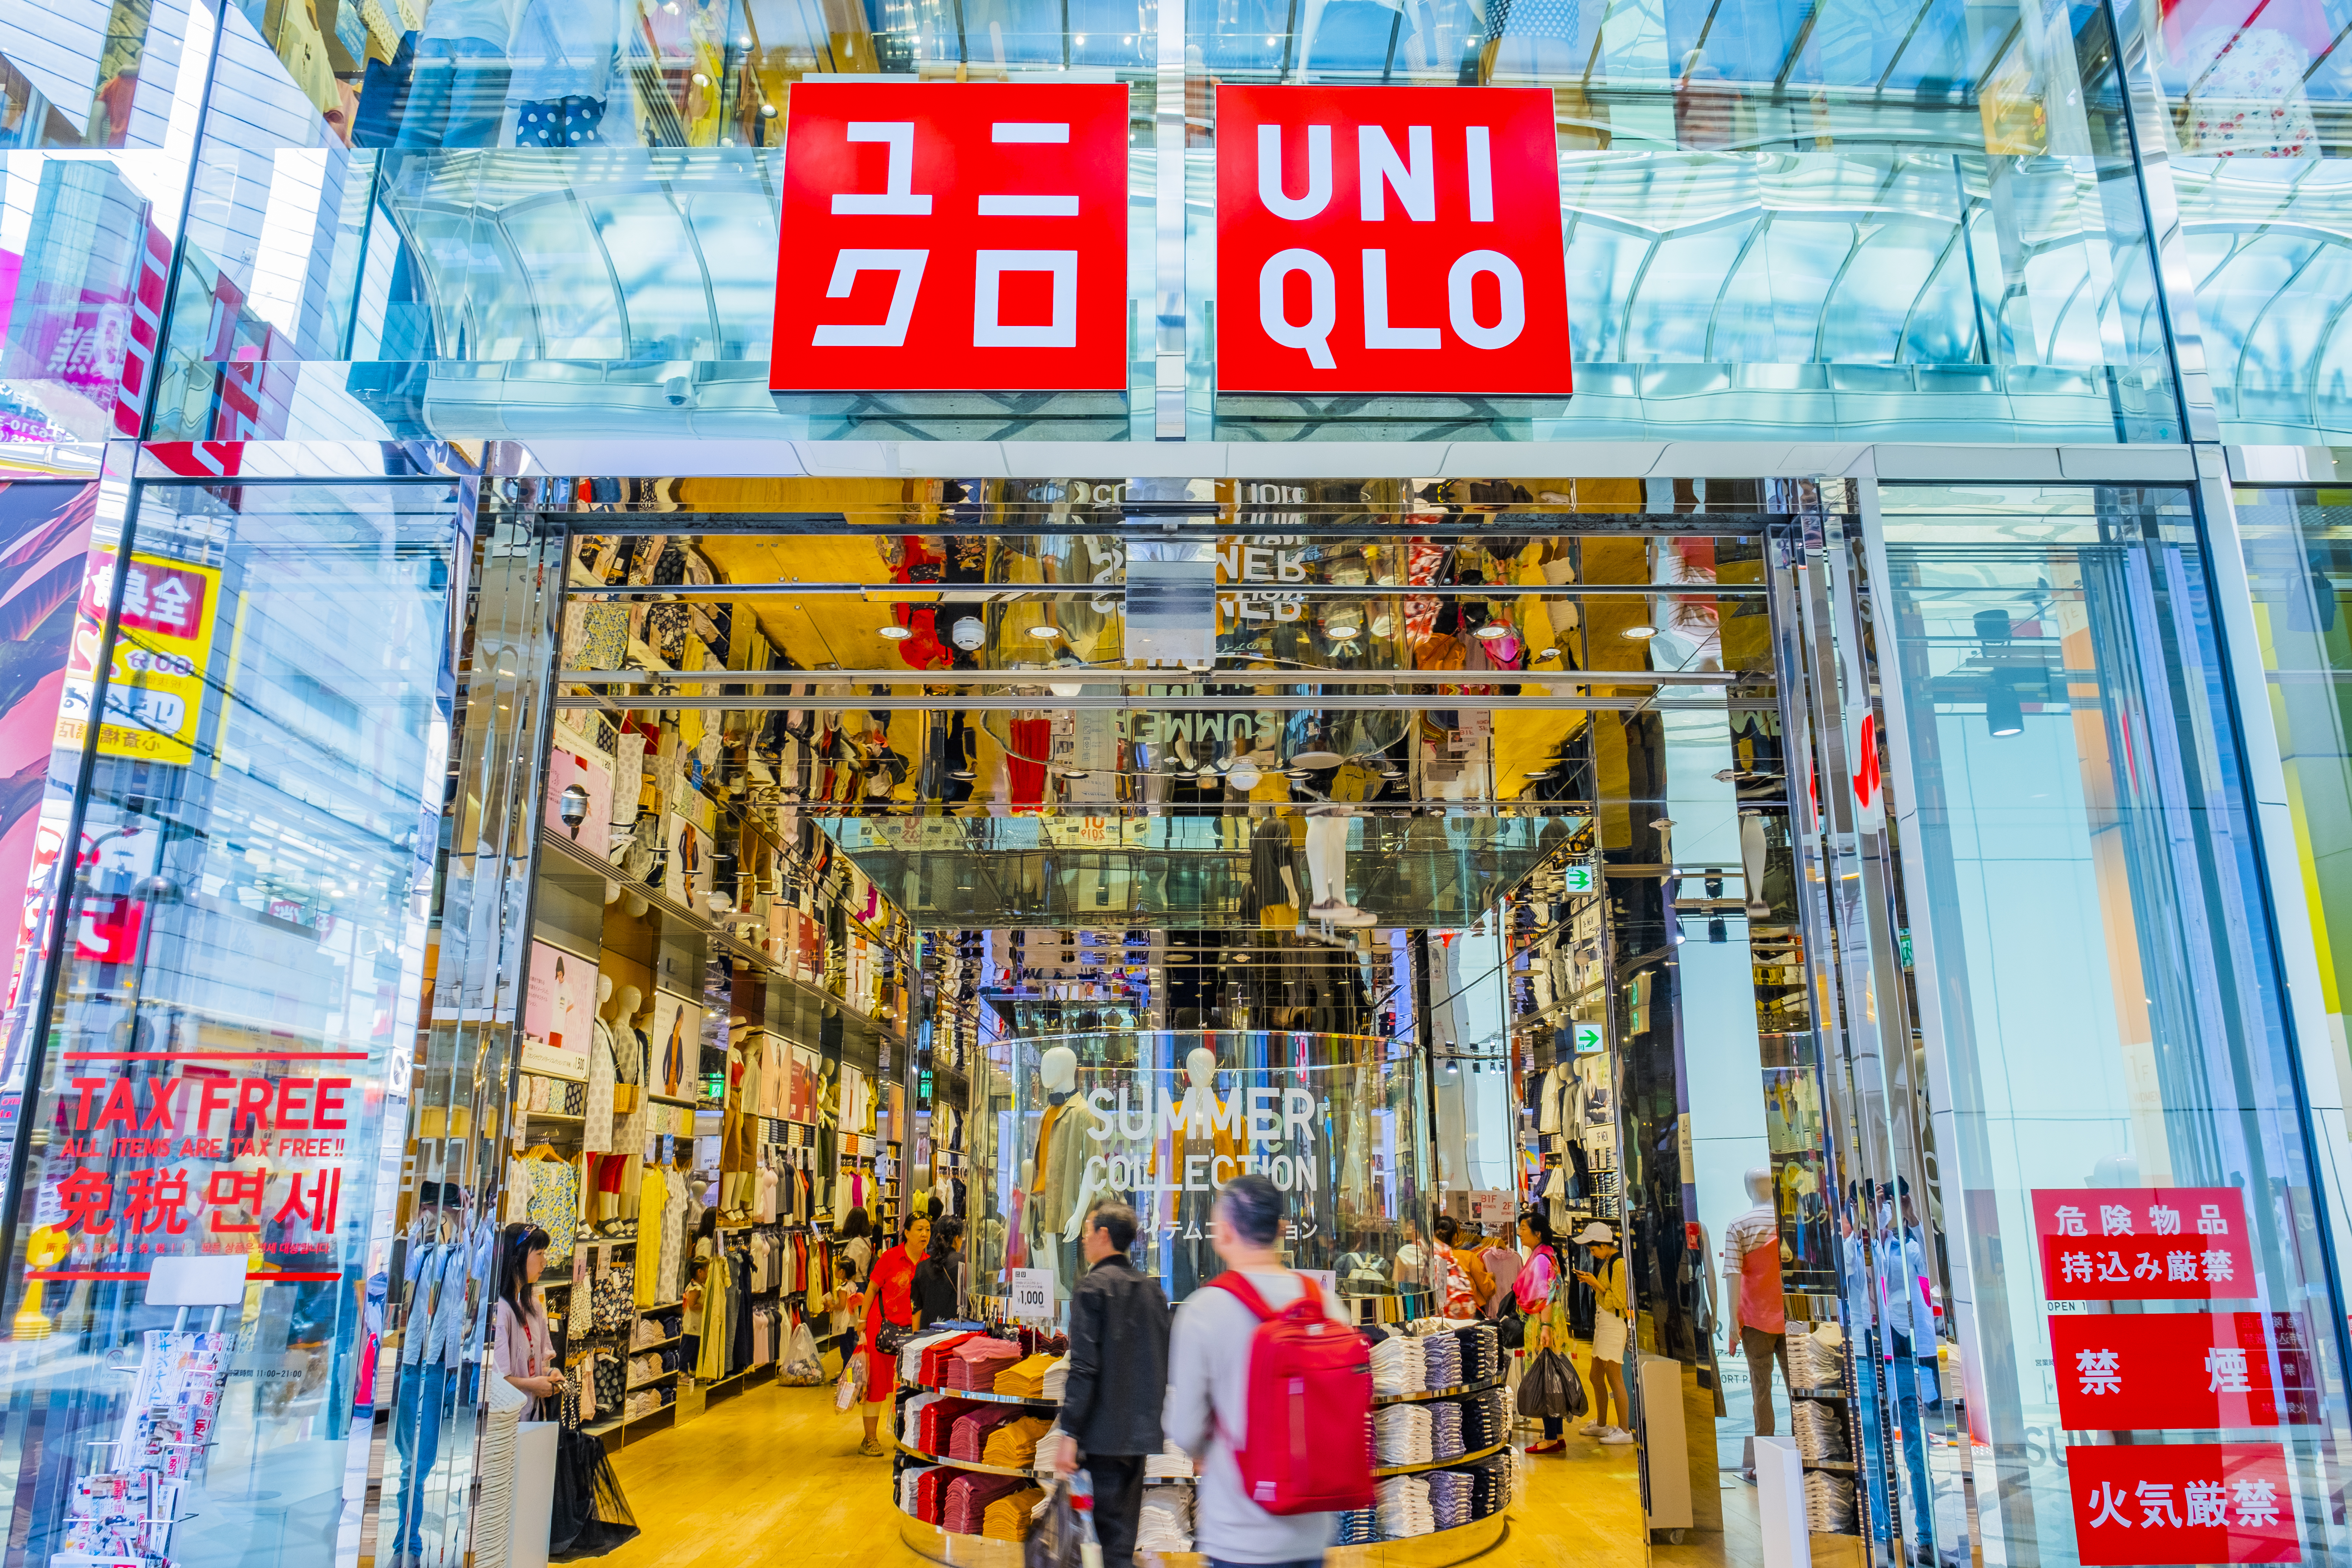 Uniqlo drives revenue growth at Fast Retailing Group